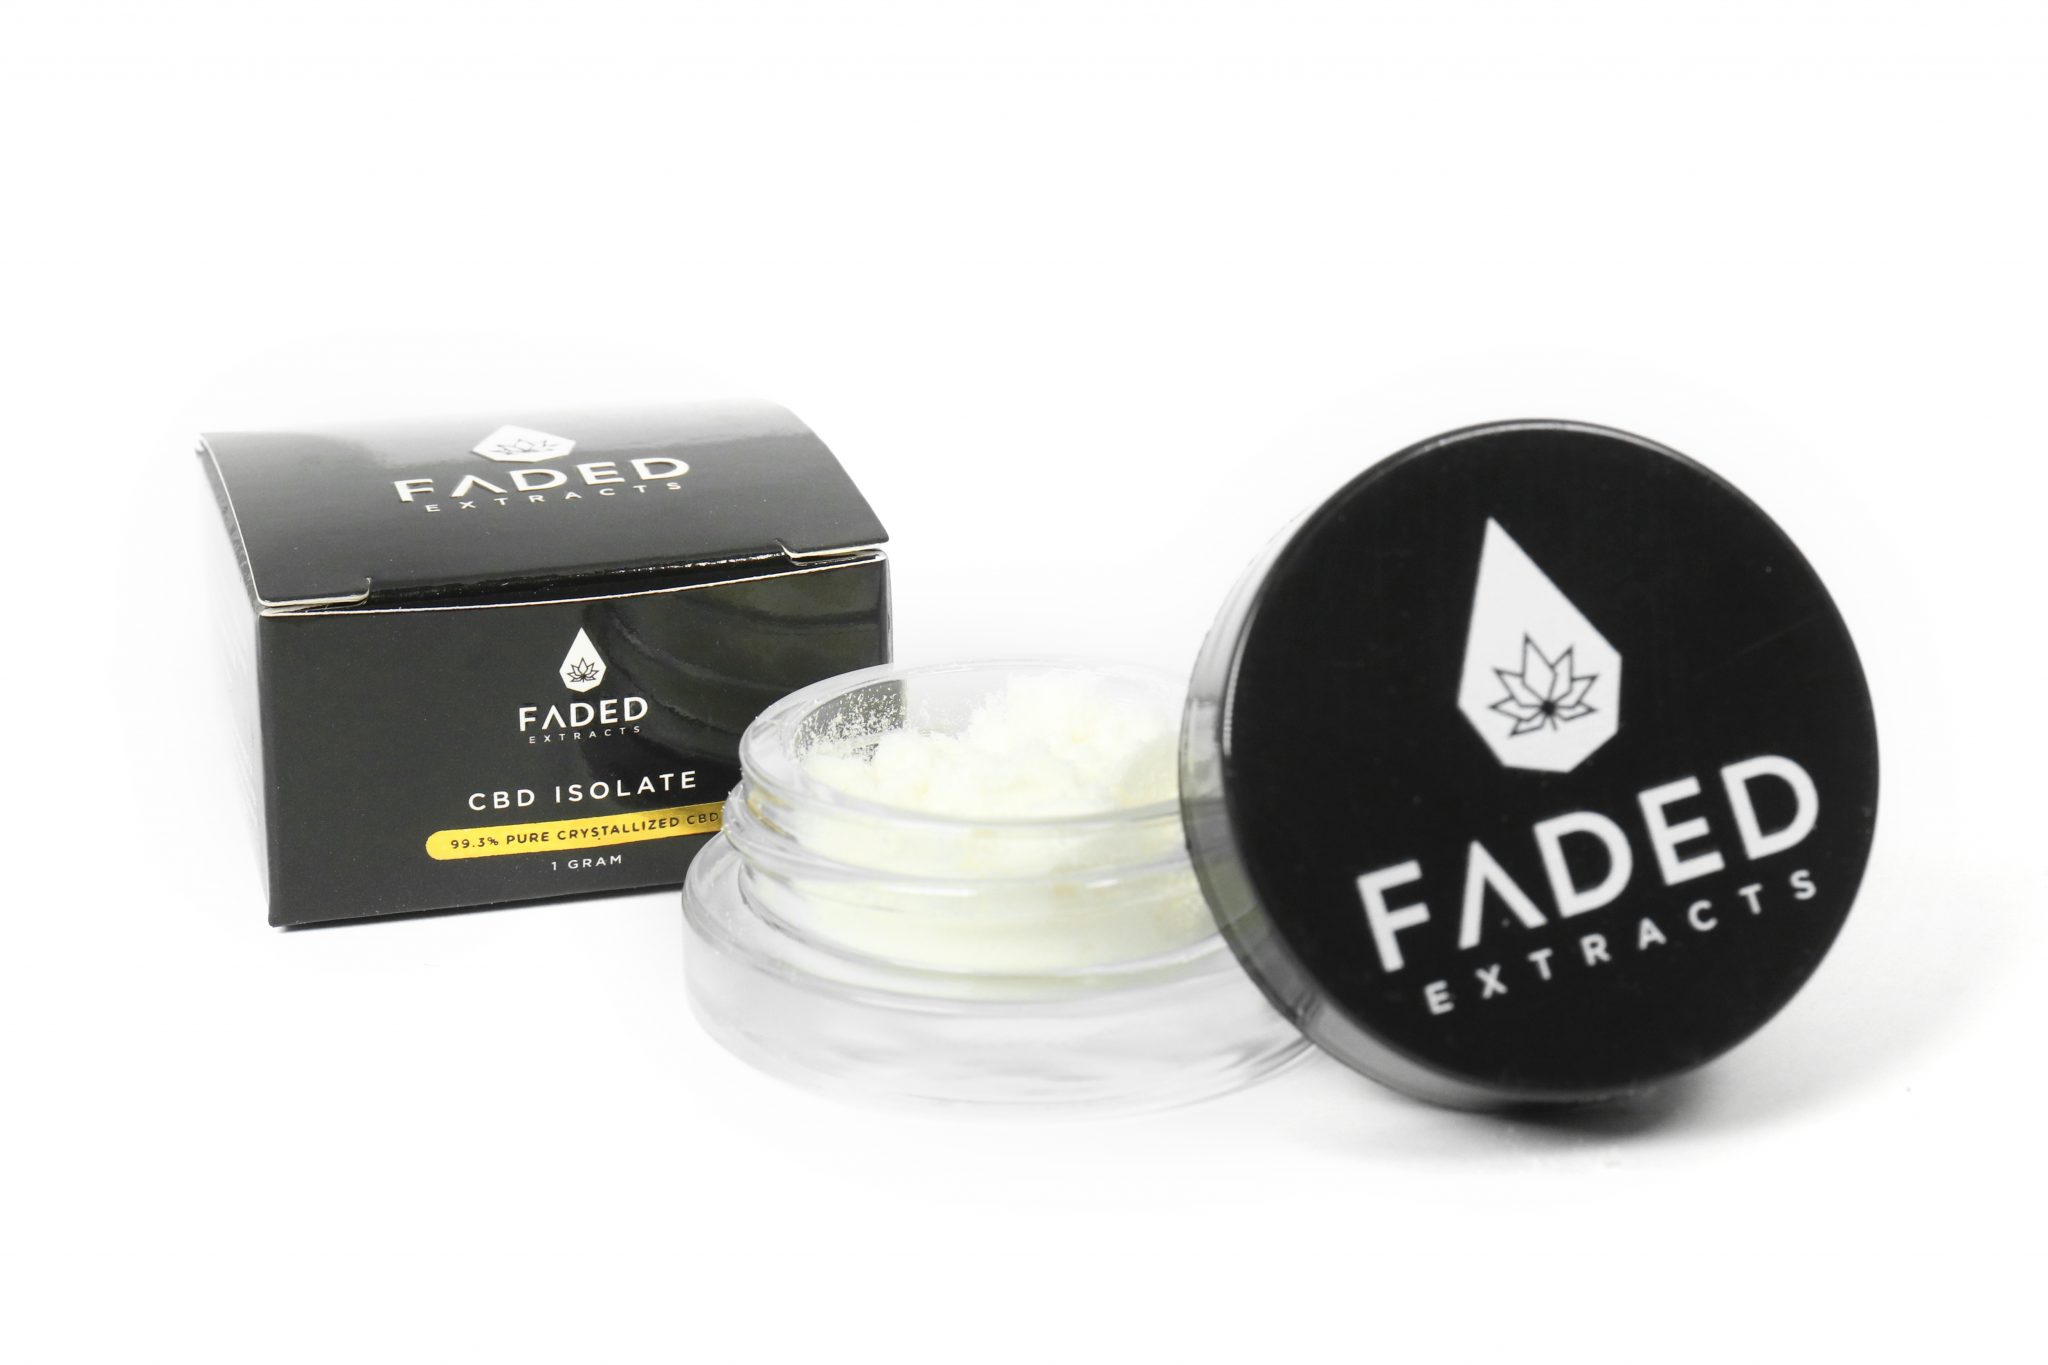 Faded Extracts CBD Isolate